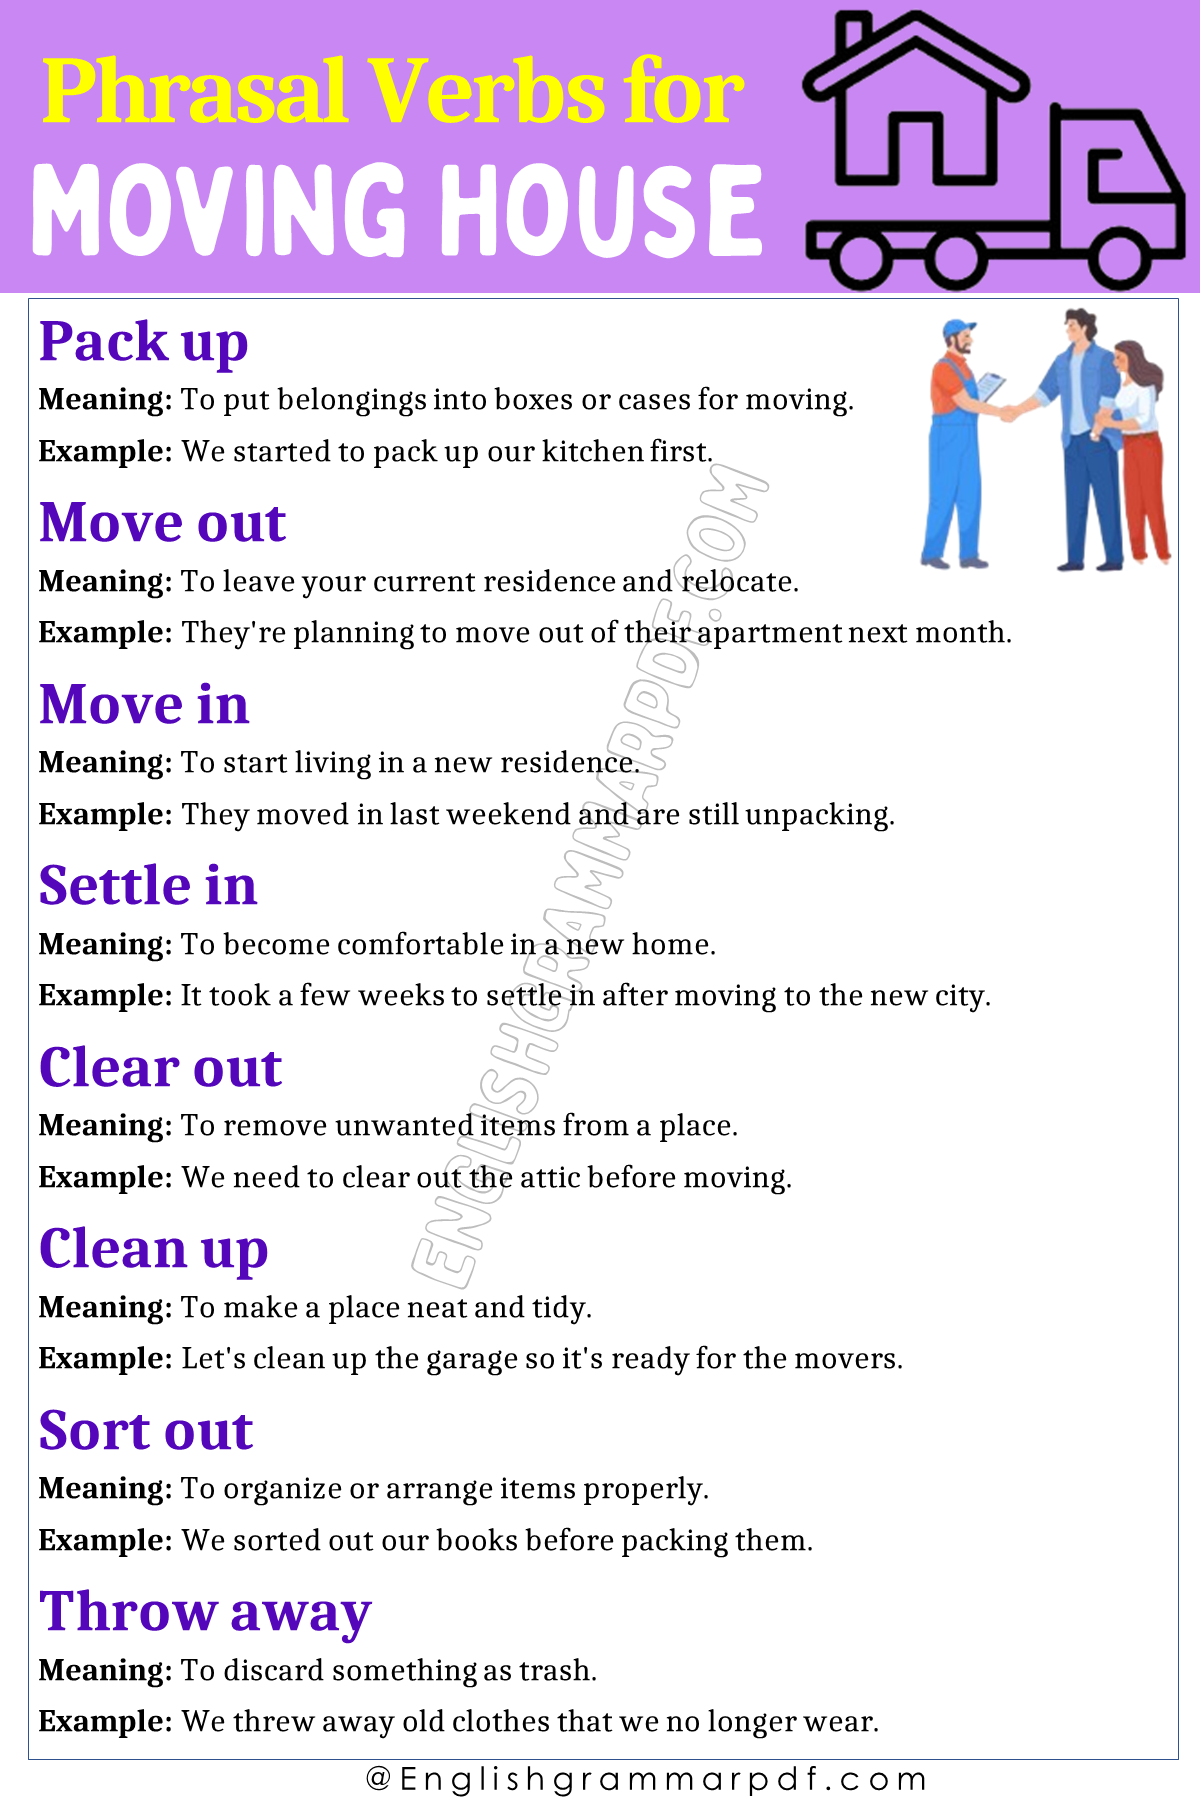 Phrasal Verbs for Moving House